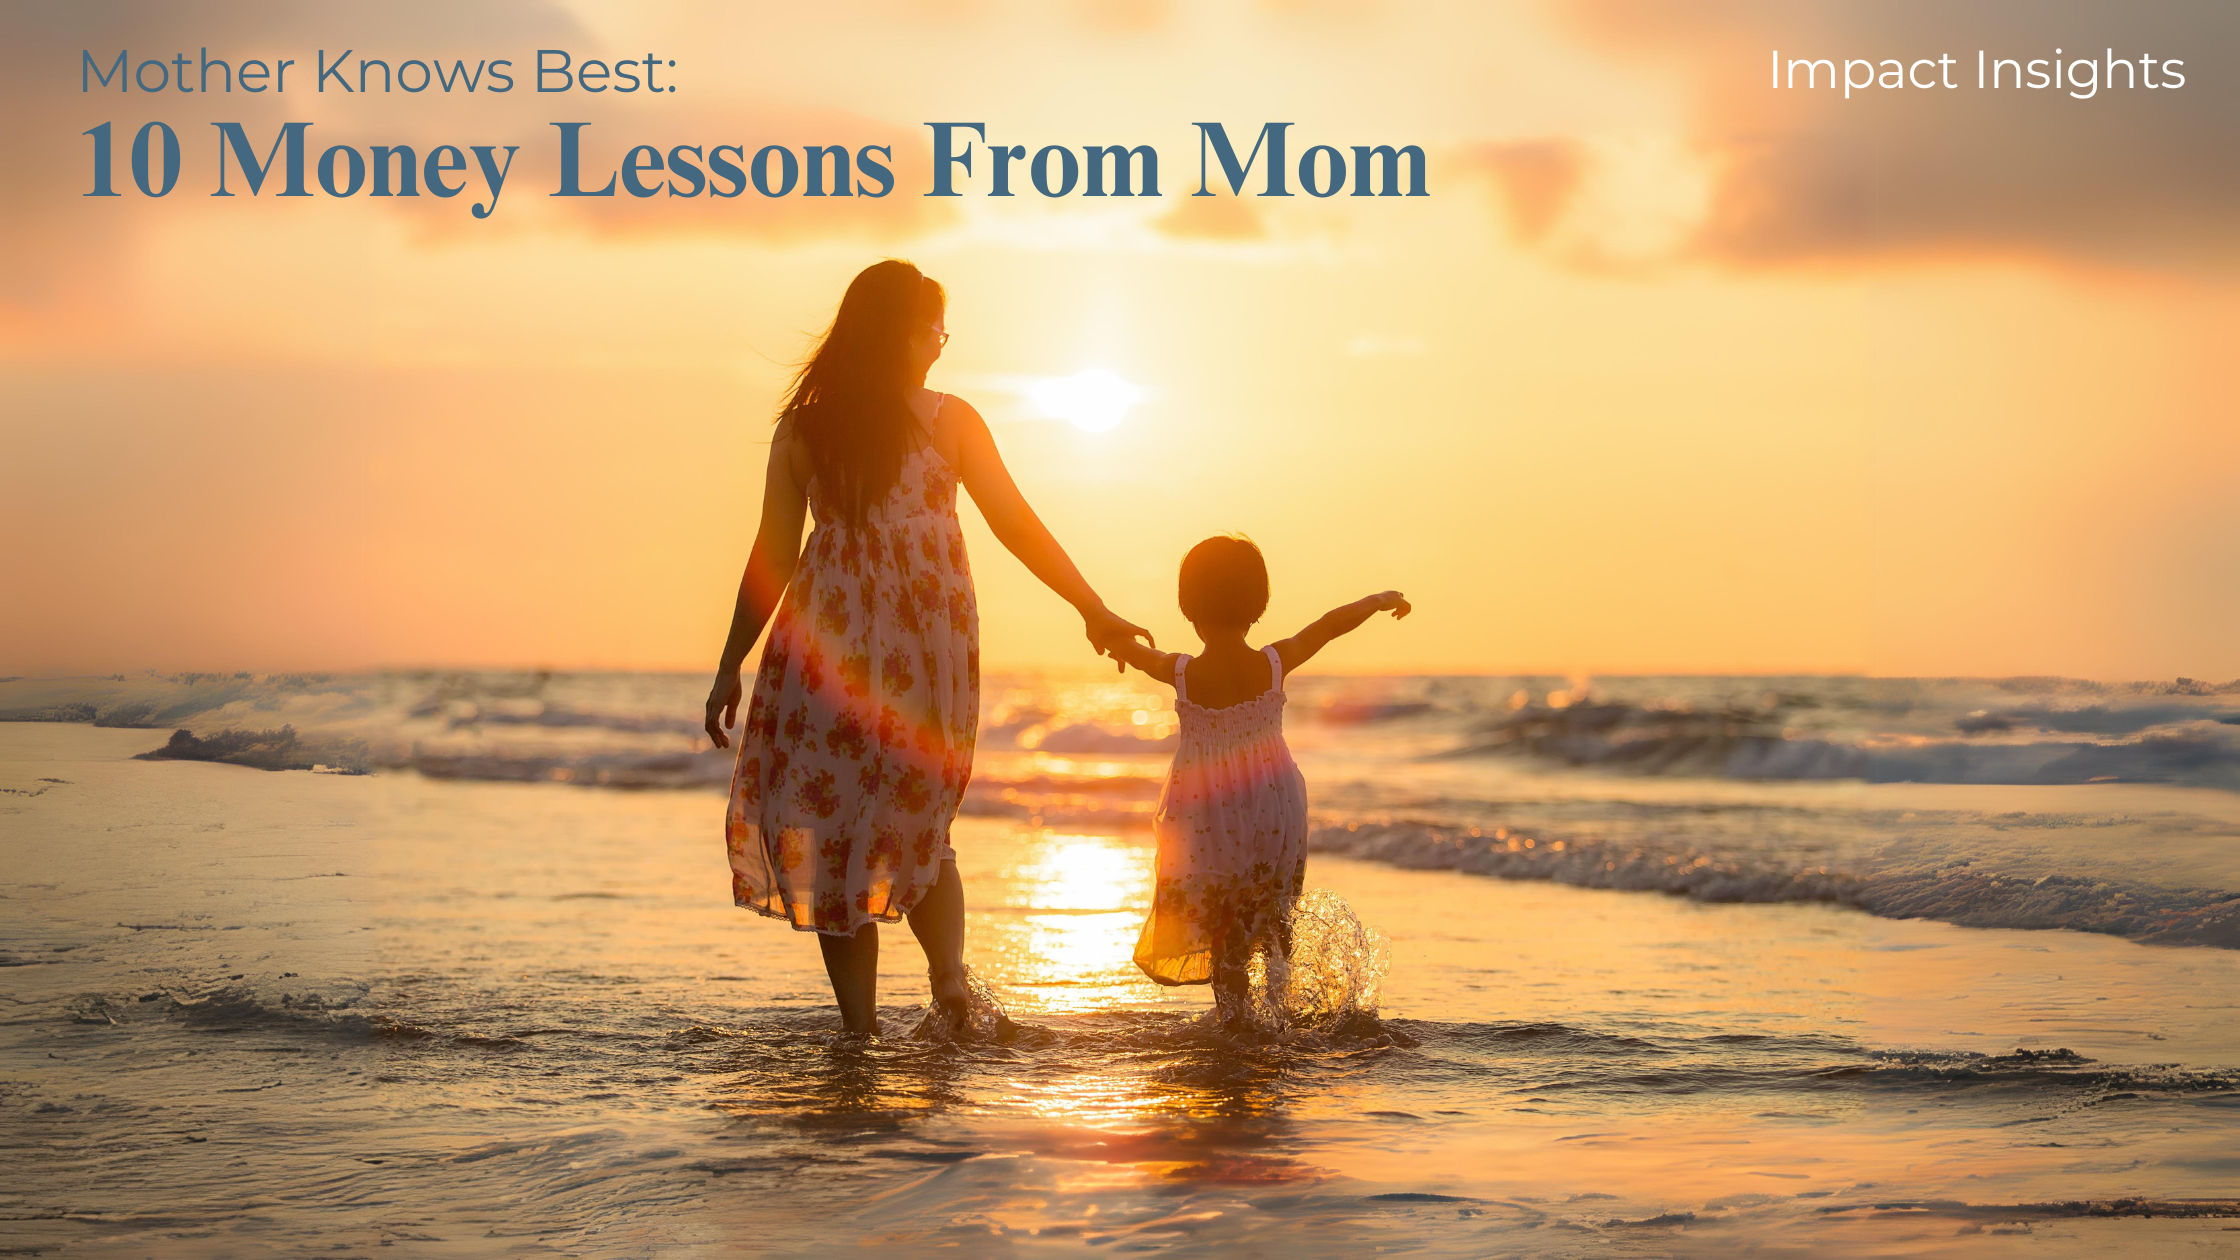 Mother Knows Best: 10 Money Lessons From Mom